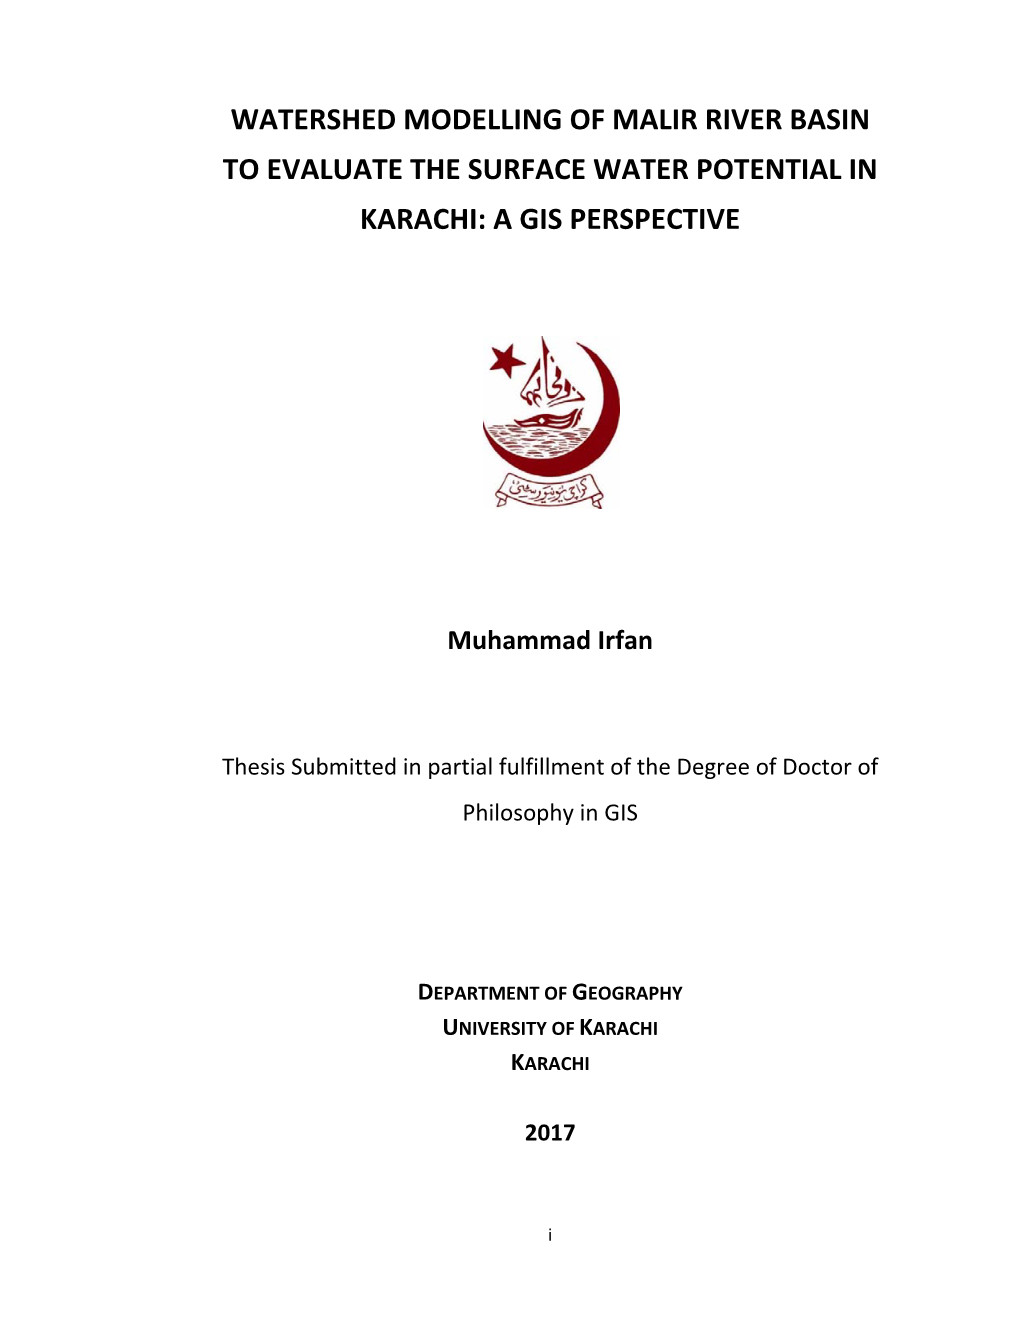 Watershed Modelling of Malir River Basin to Evaluate the Surface Water Potential in Karachi: a Gis Perspective